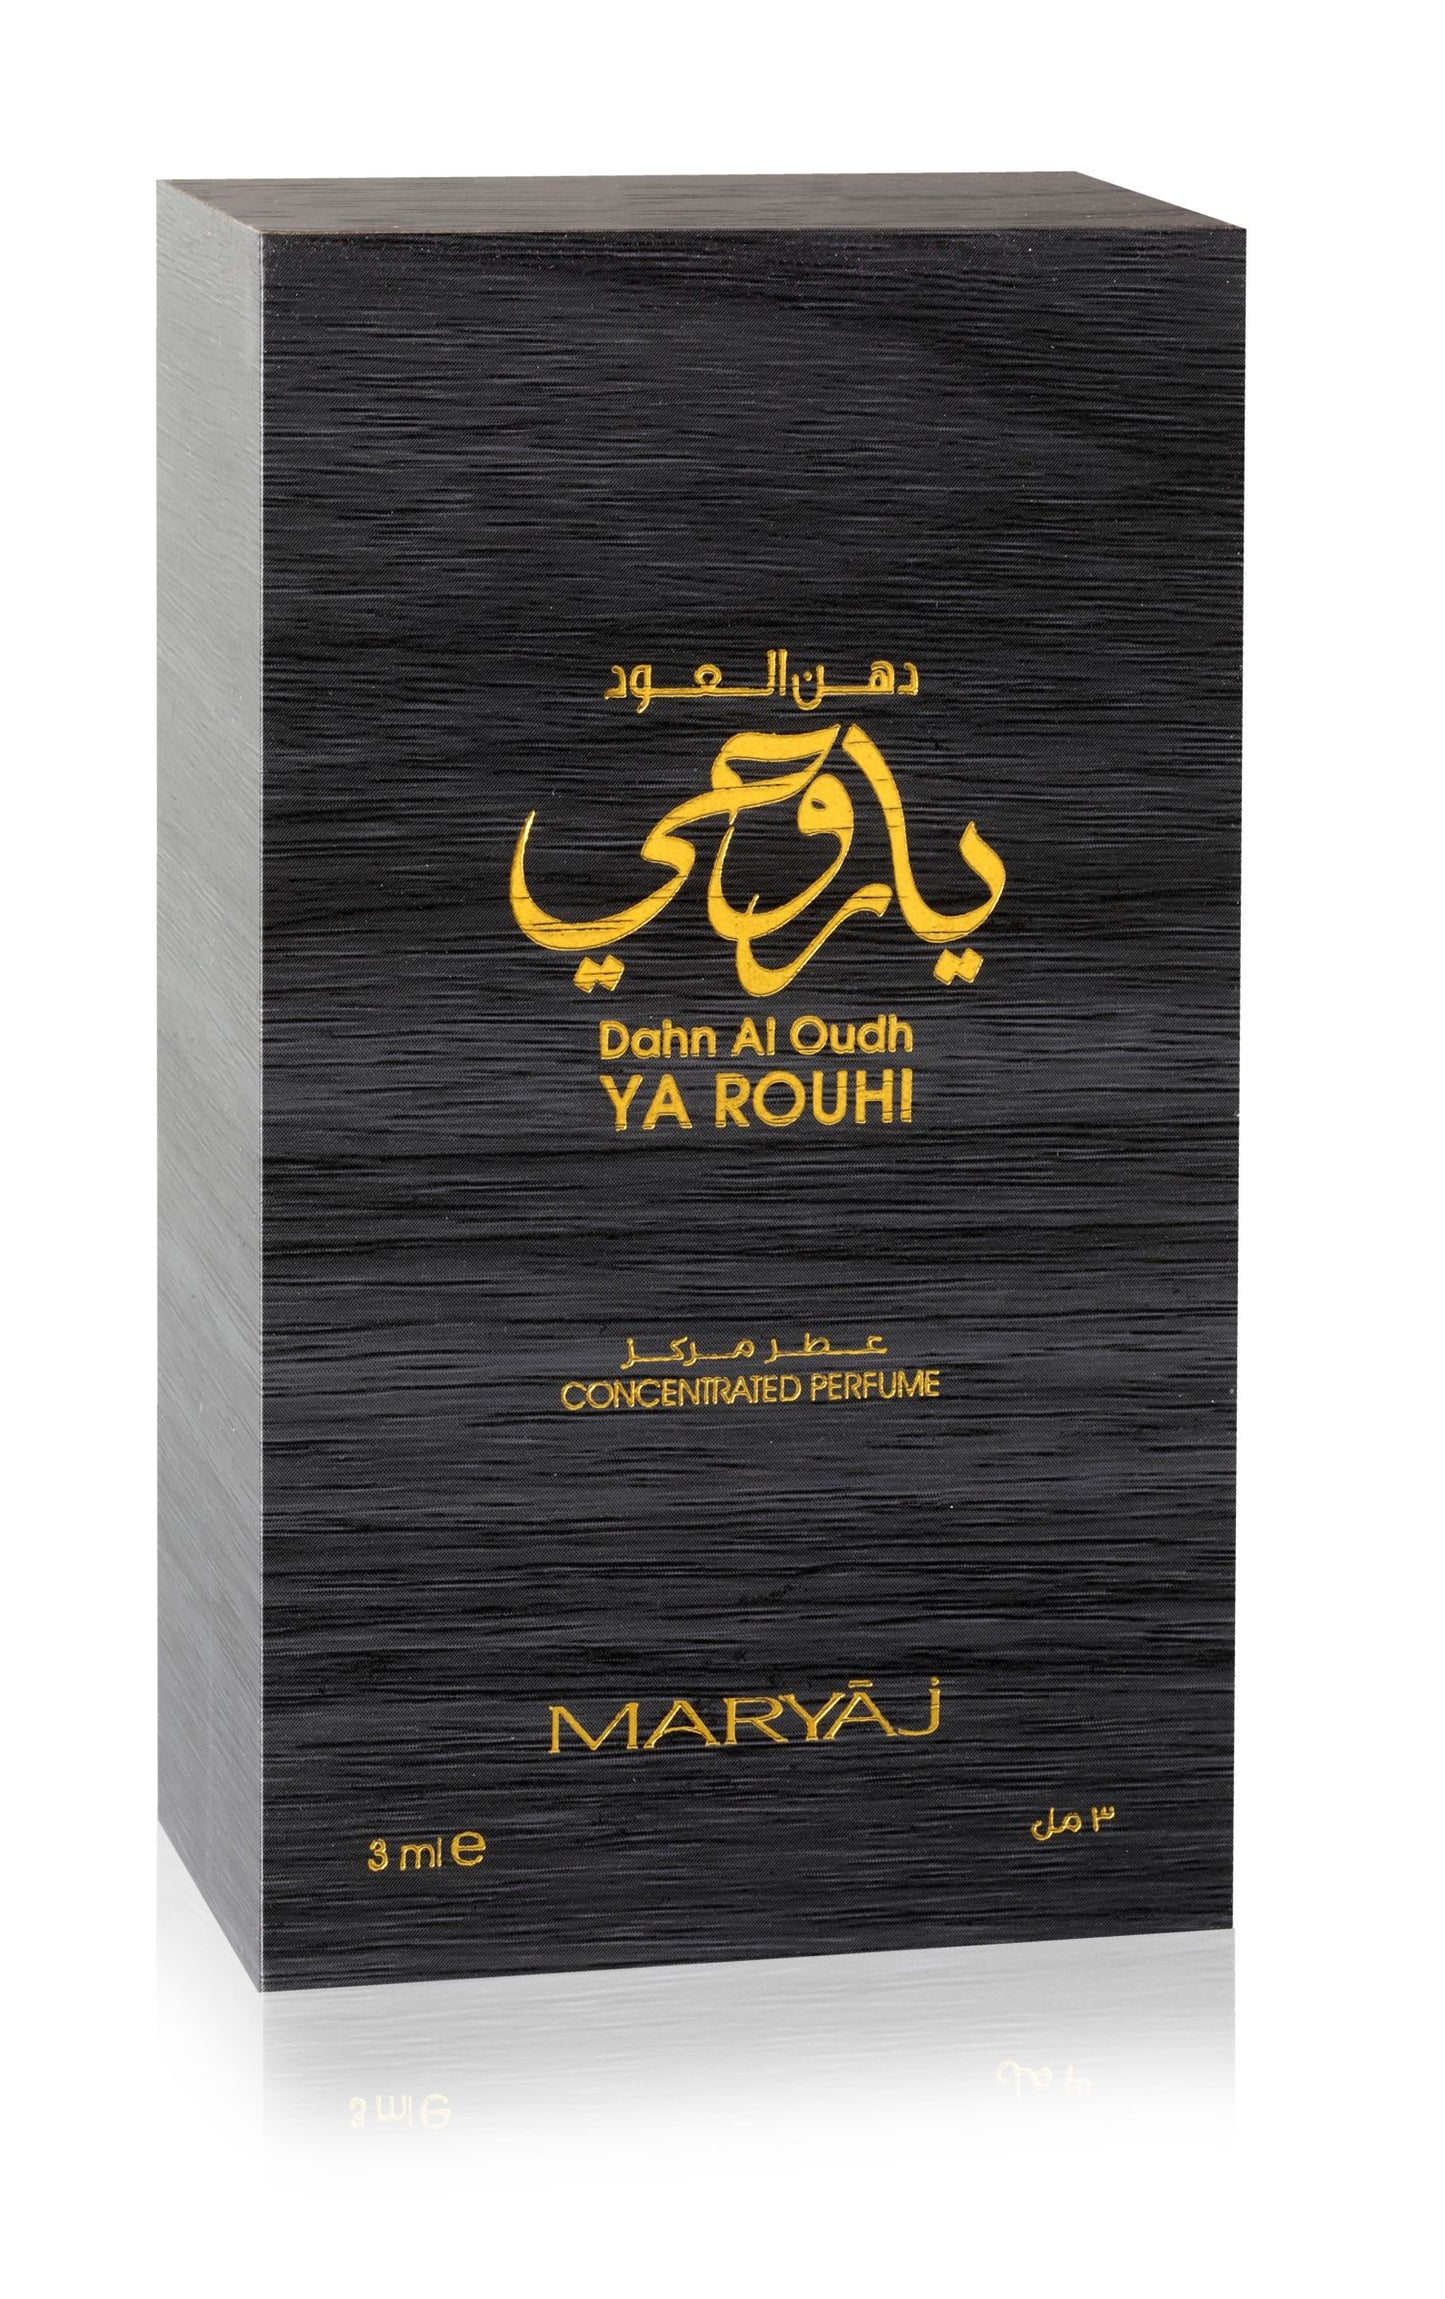 DAHN AL OUD YA ROUHI Concentrated Perfume Oil Combo For Men, 3 ml (Pack of 3)